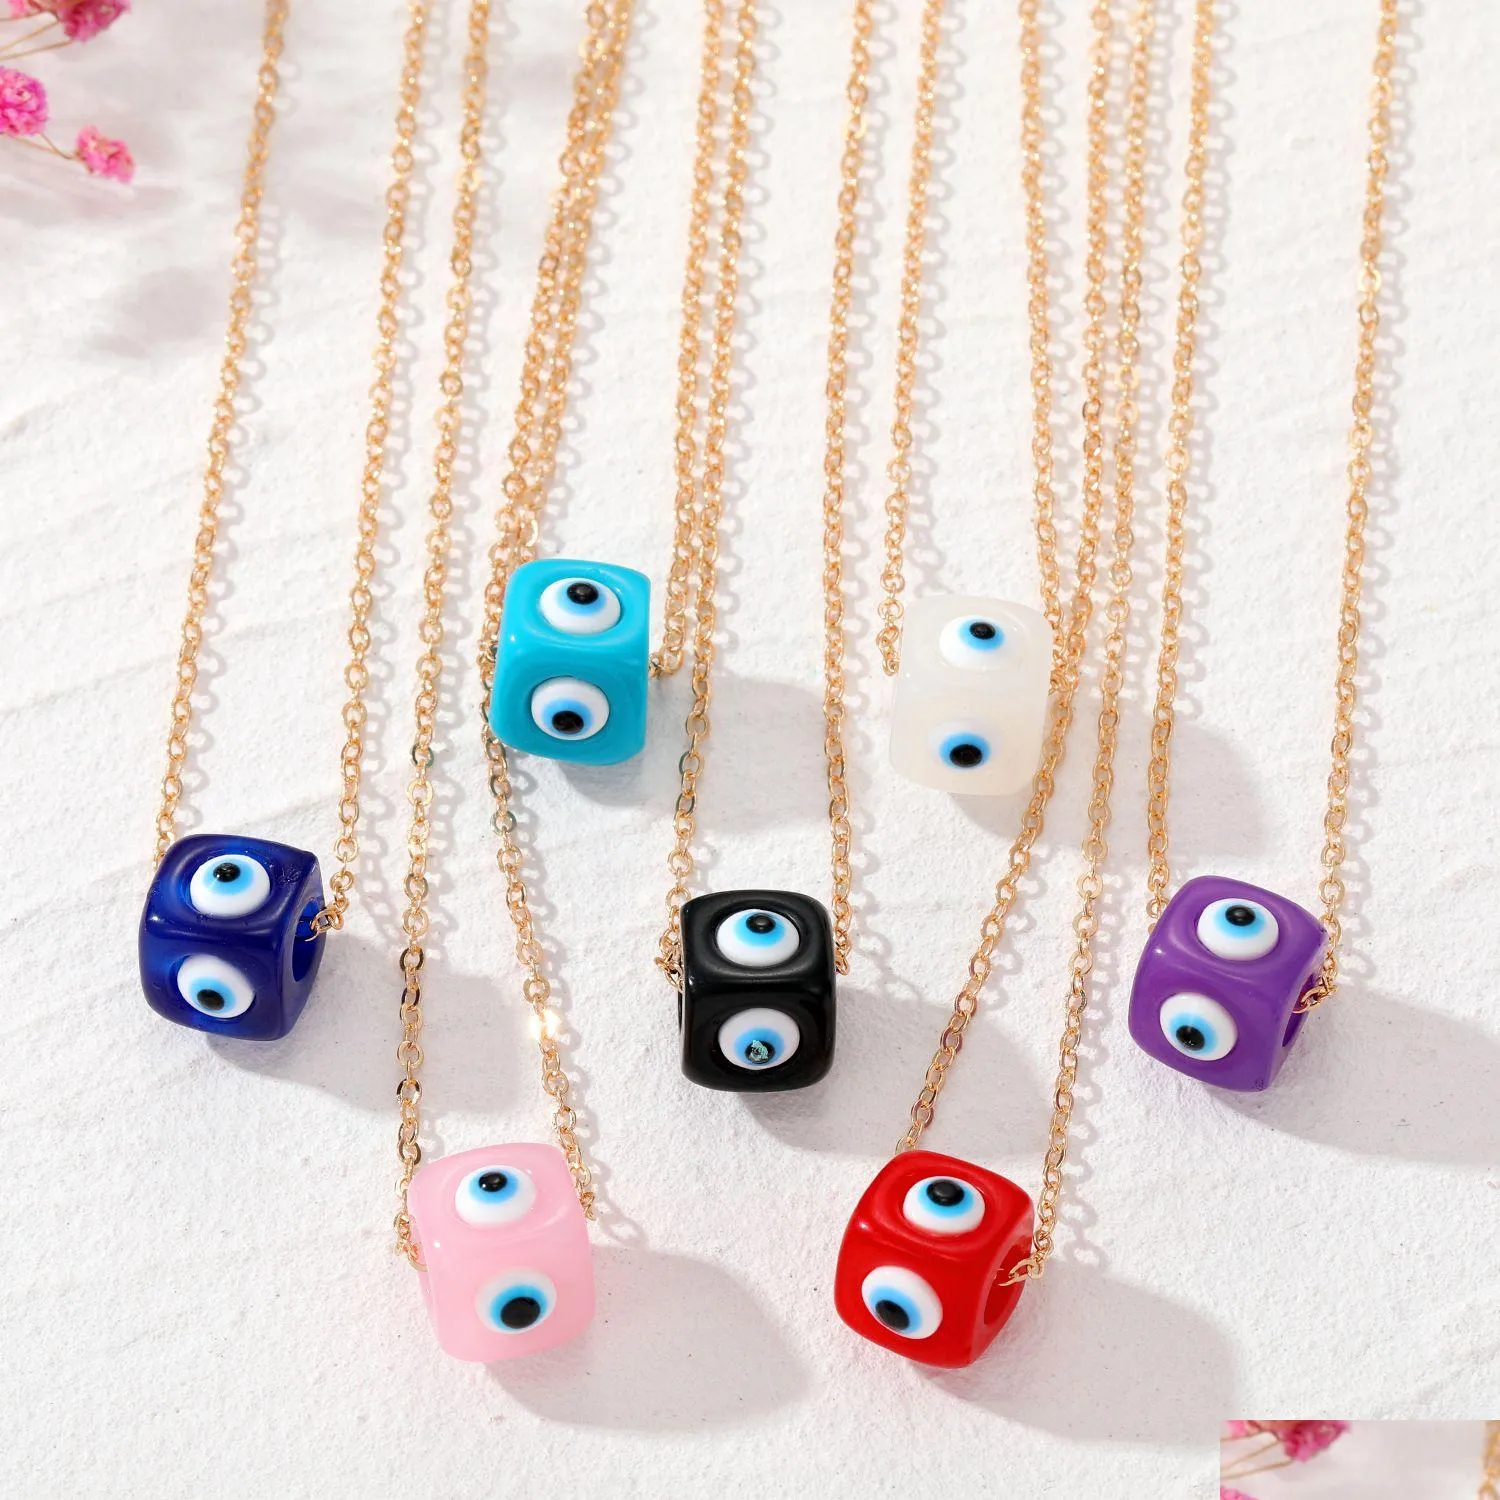 resin square evil eye bead pendant necklaces for women blue eyes necklace